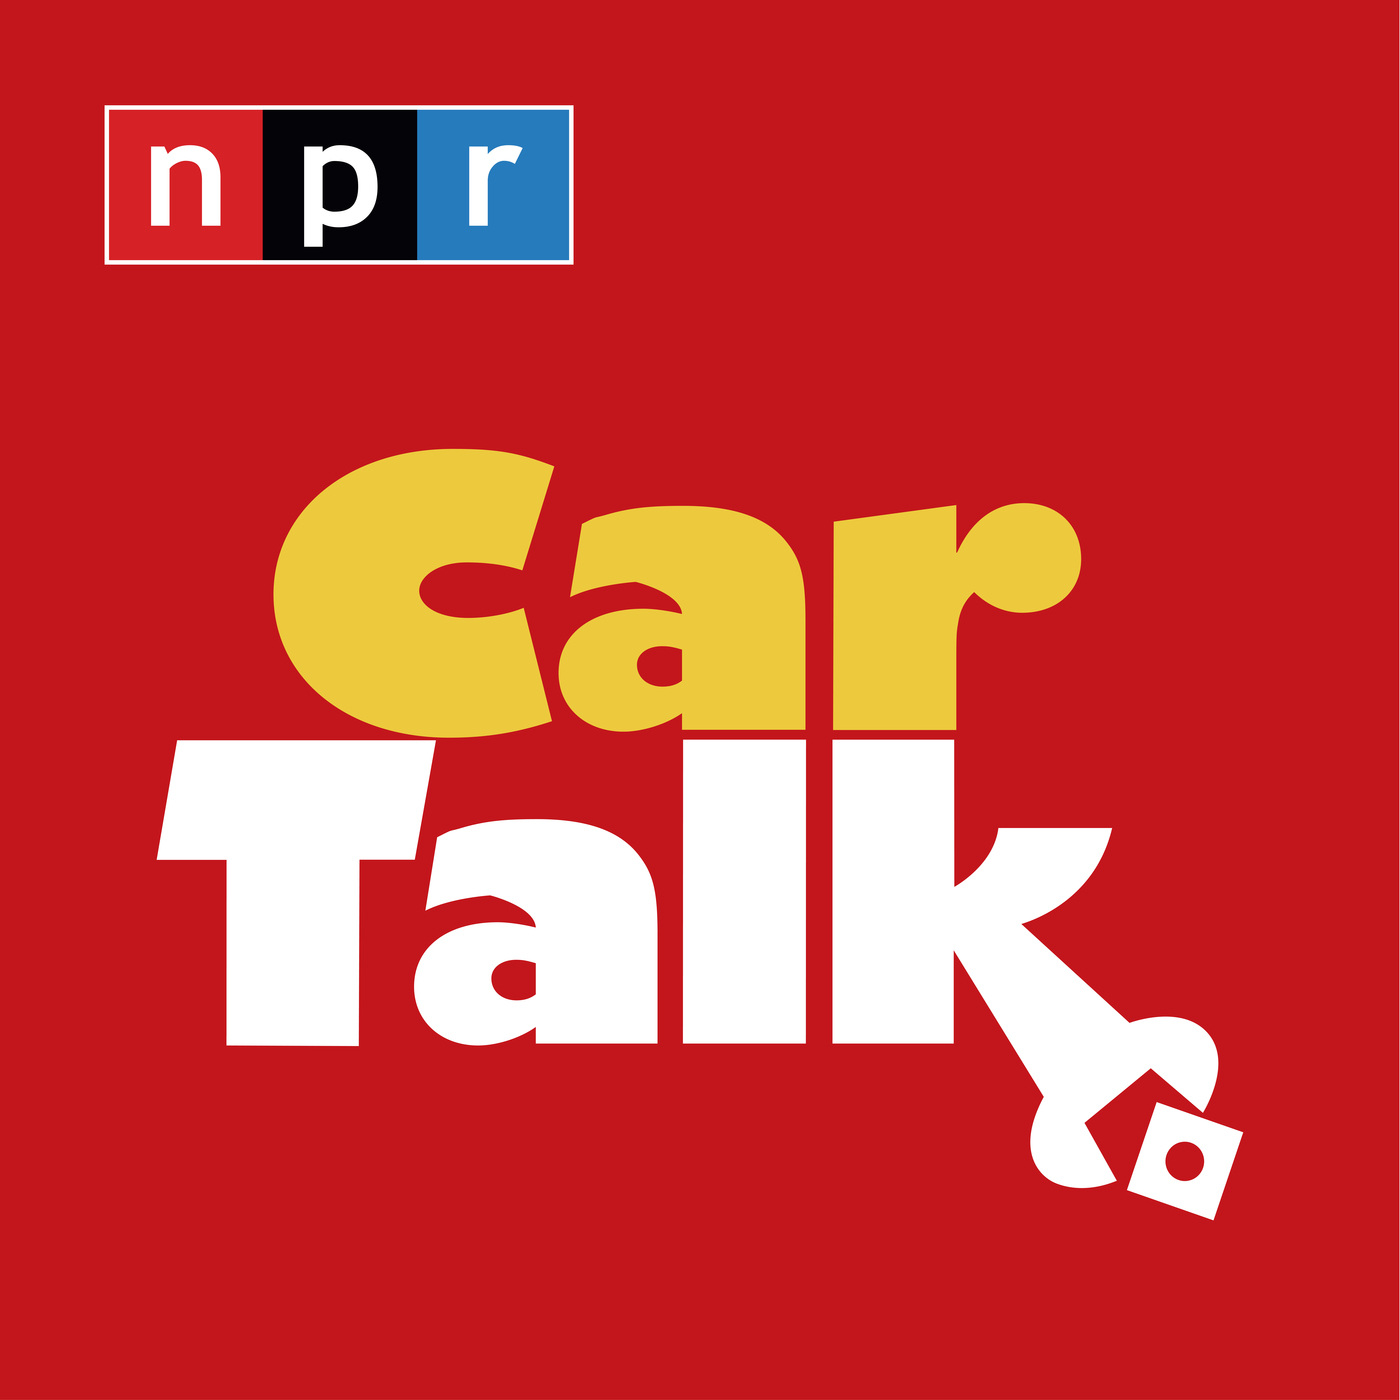 The Best of Car Talk